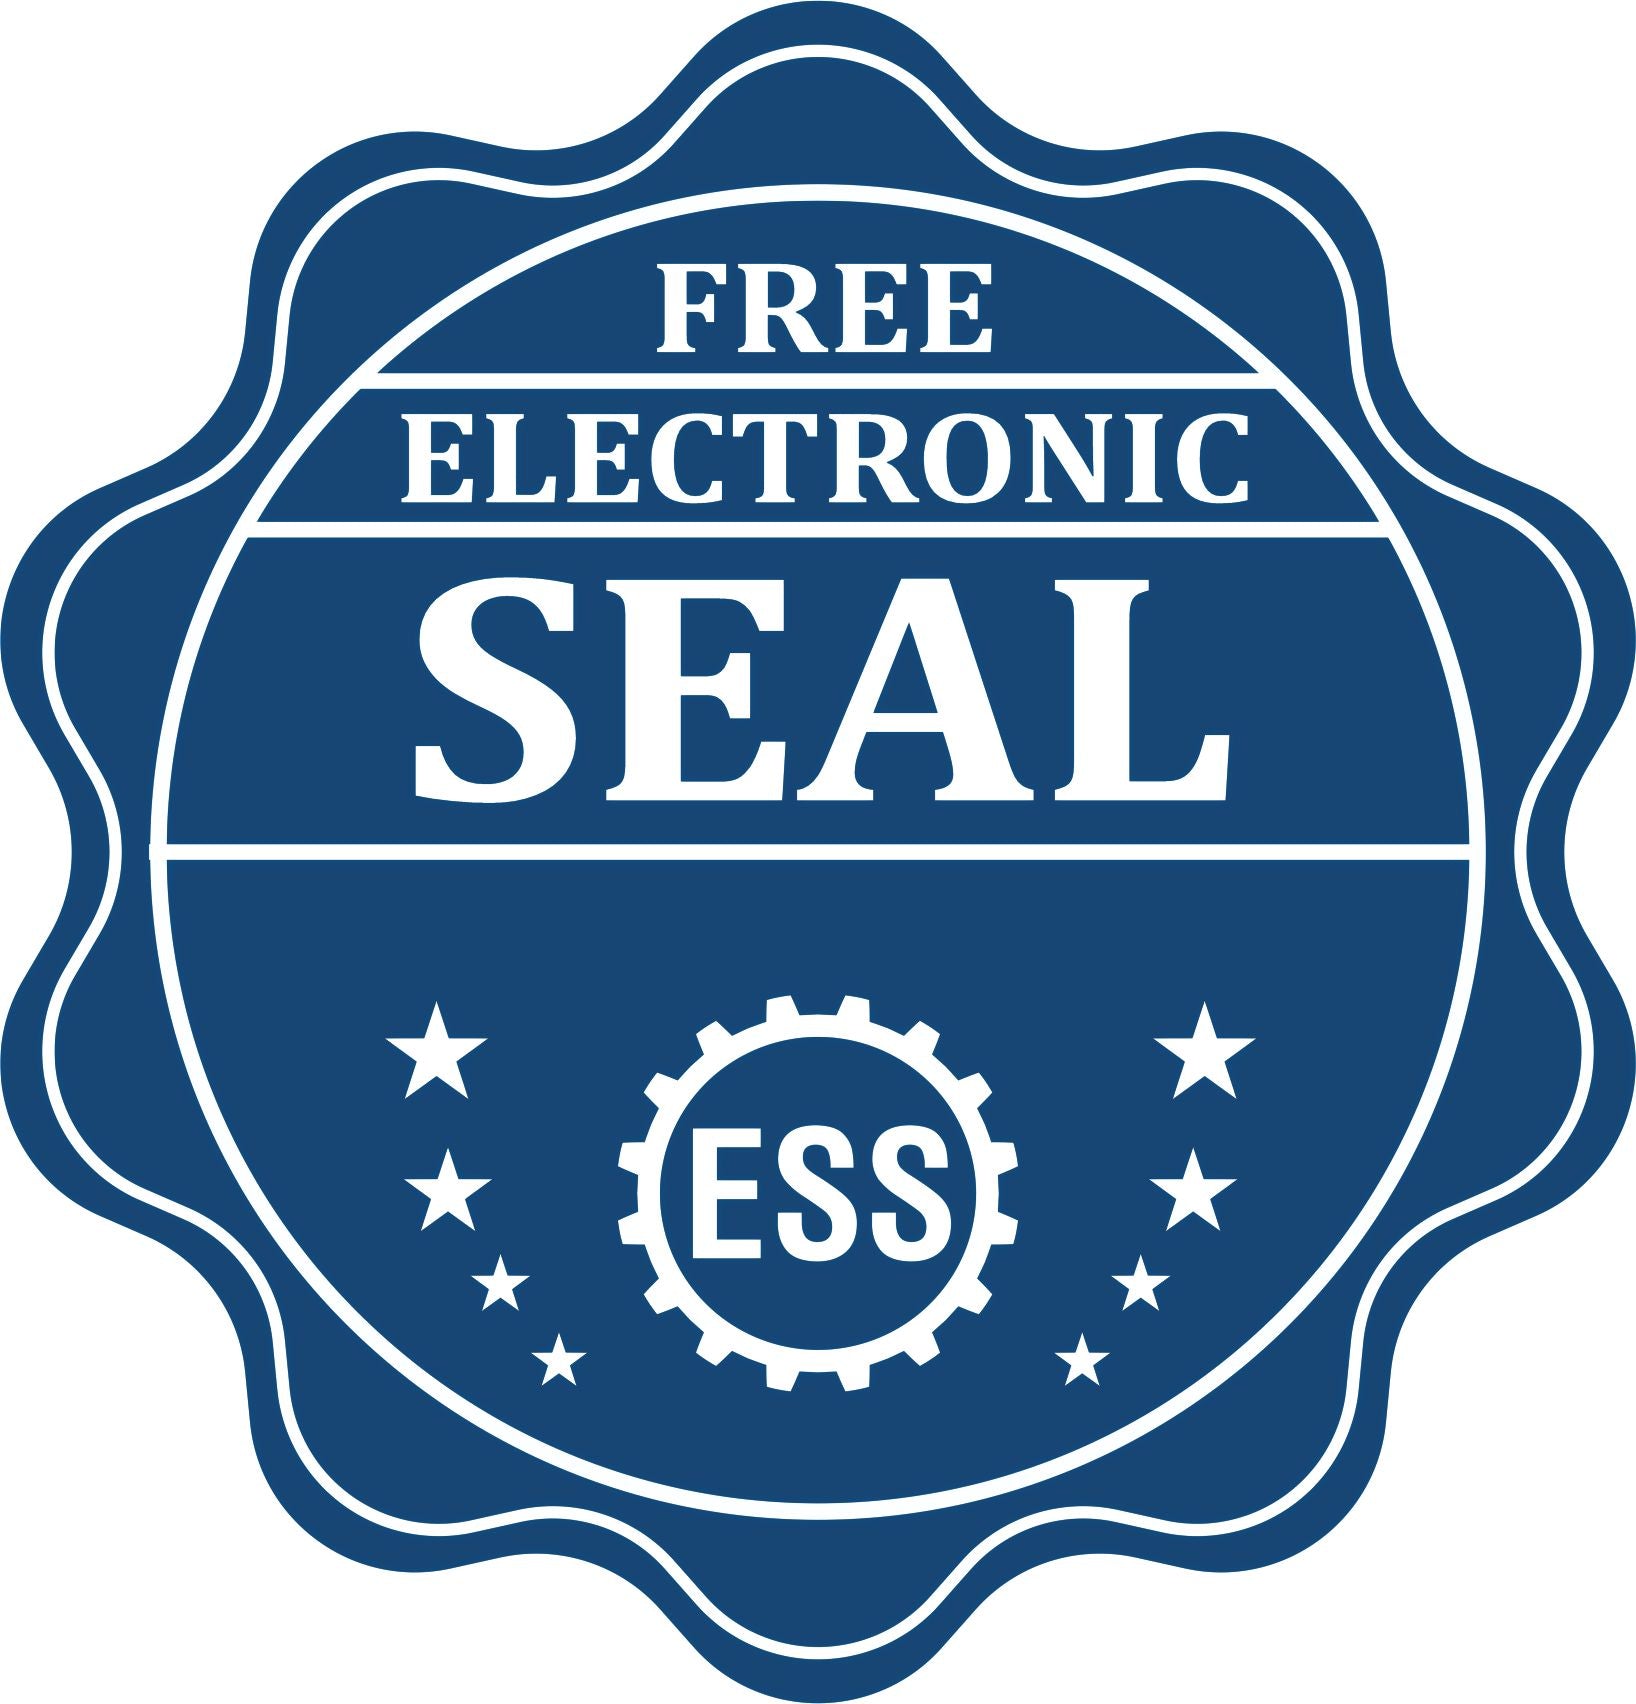 A badge showing a free electronic seal for the Slim Pre-Inked Mississippi Professional Engineer Seal Stamp with stars and the ESS gear on the emblem.